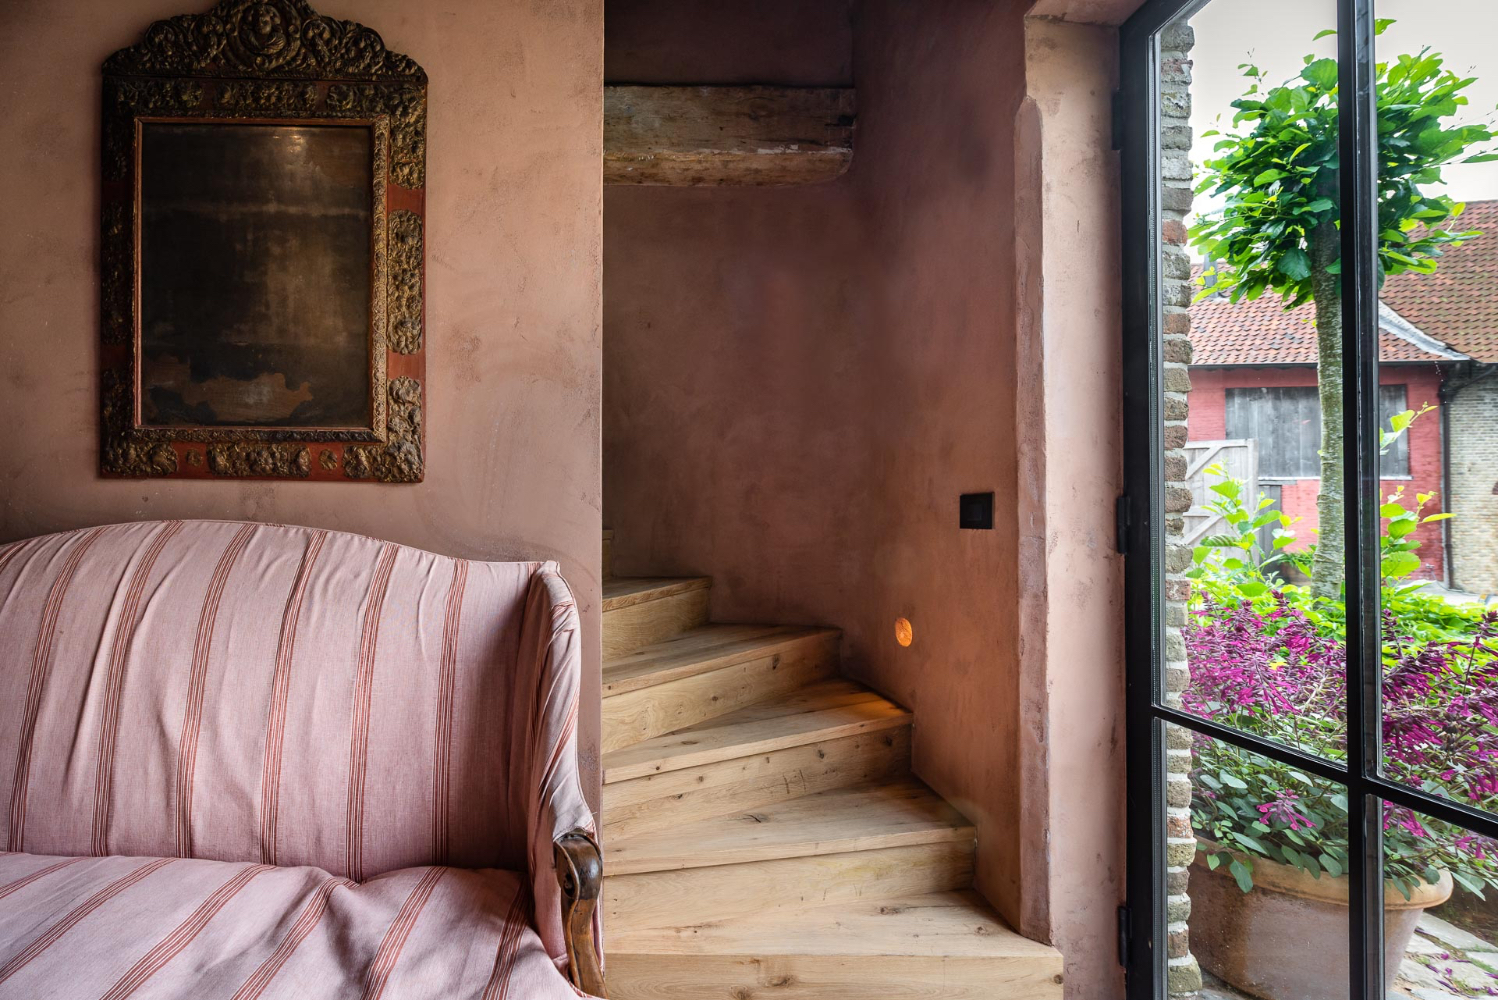 Rosy plaster walls, character rich wood steps, and exquisitely decorated interiors grace The Little Monastery, a B&B by Brigitte Garnier. Come see more!